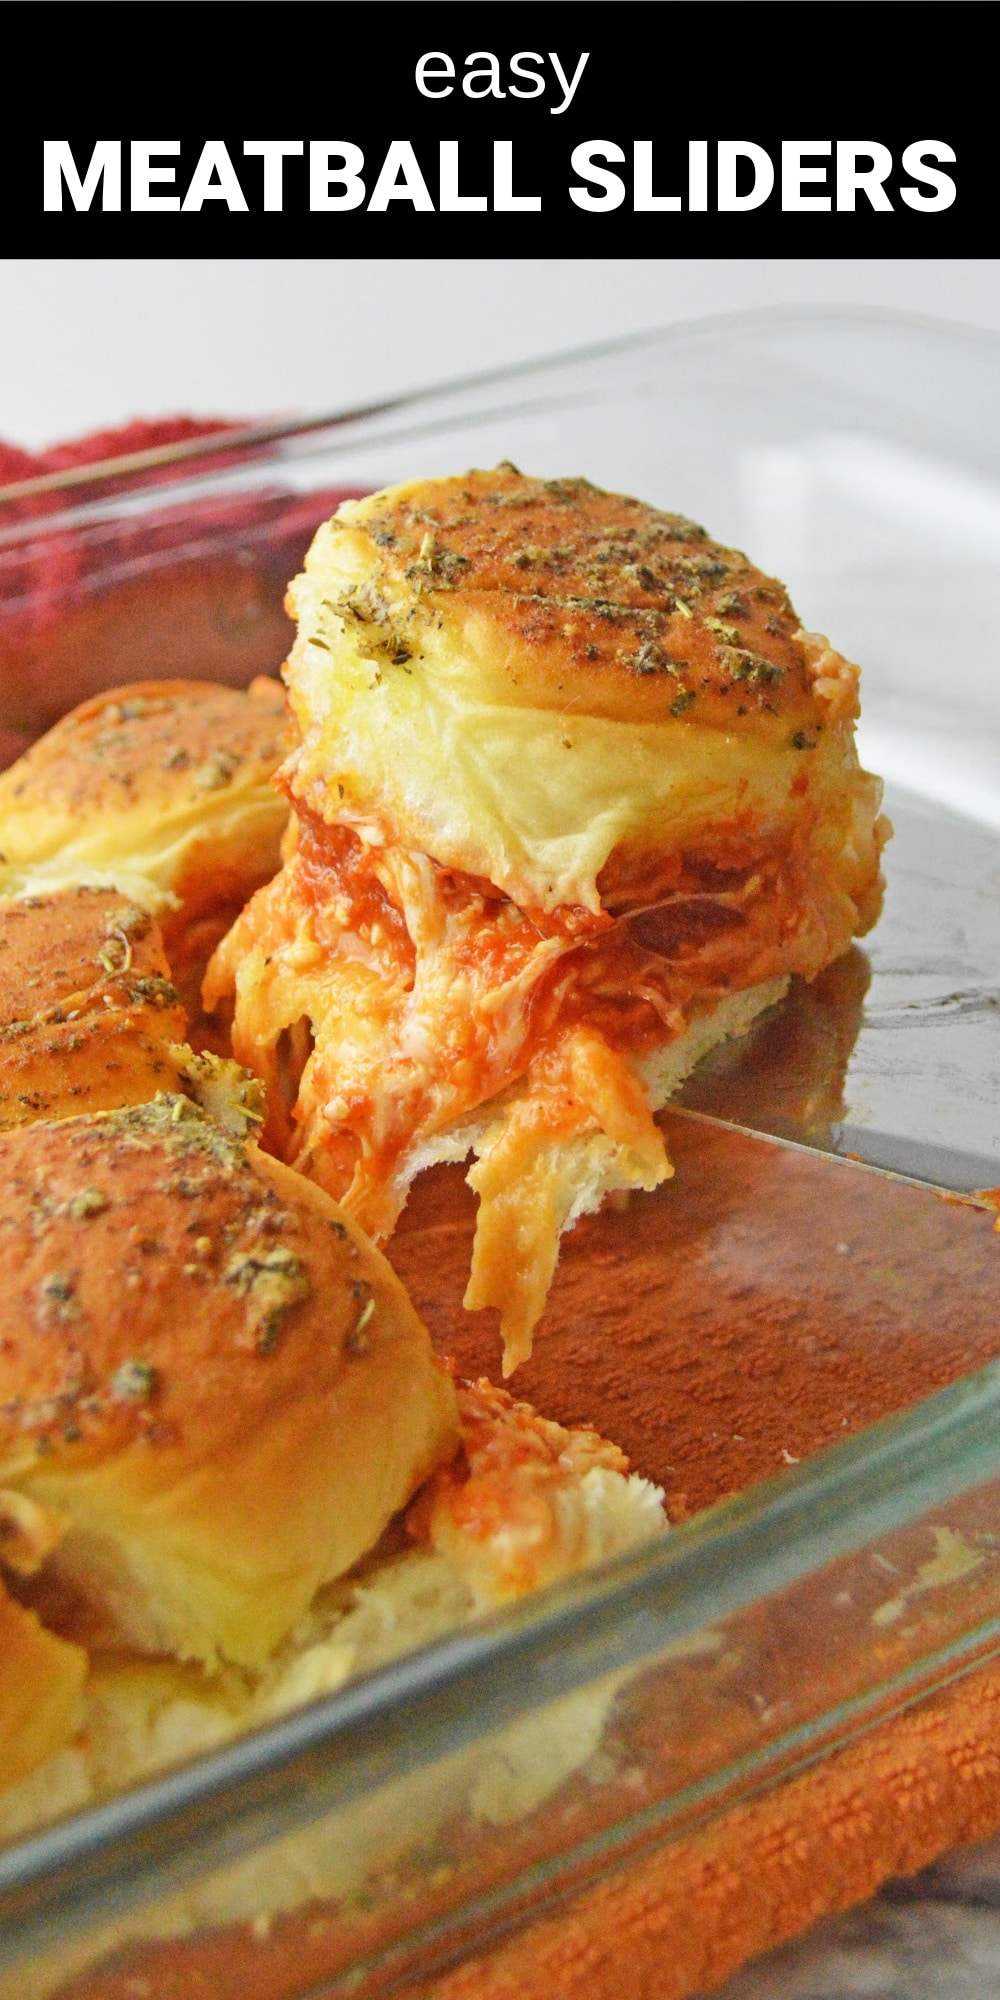 These easy cheesy pull apart Meatball Sliders are filled with tender and juicy meatballs, topped with gooey cheese and tangy pasta sauce sandwiched in pillowy soft rolls. They're perfect for party appetizer, game day food, or a quick dinner the whole family will love.